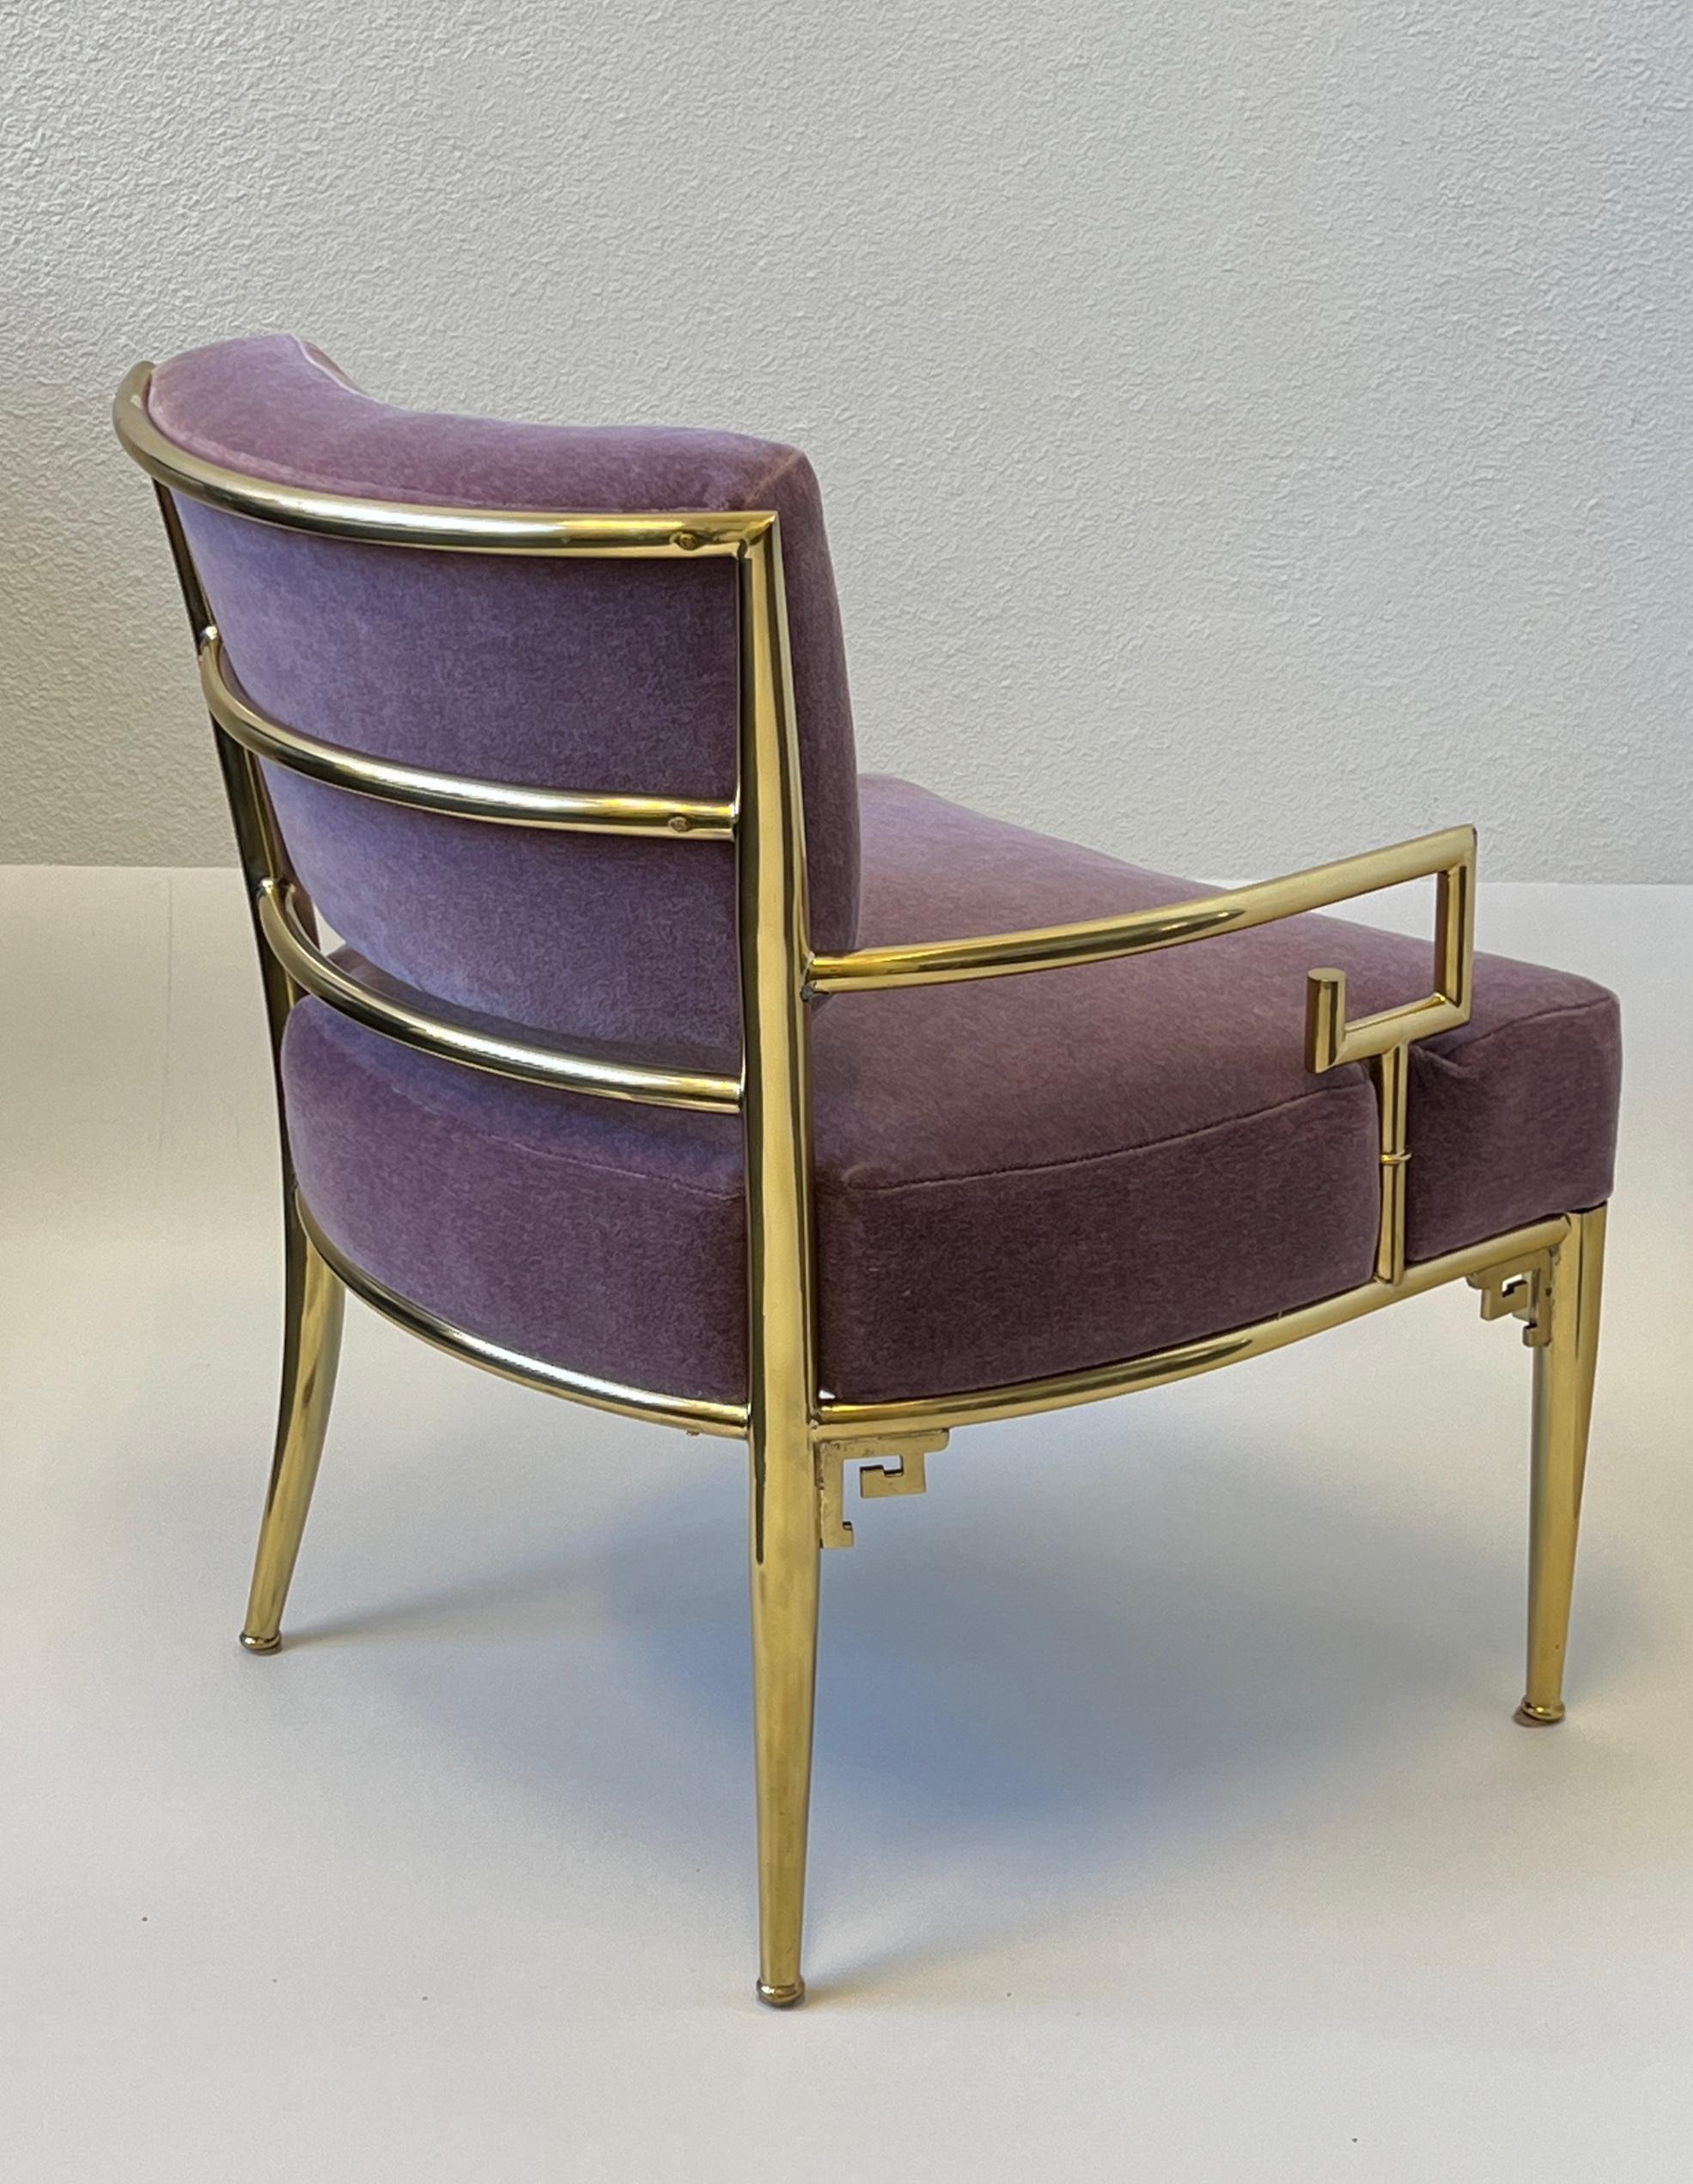 Hollywood Regency Brass and Purple Mohair Greek Key Lounge Chair by Mastercraft